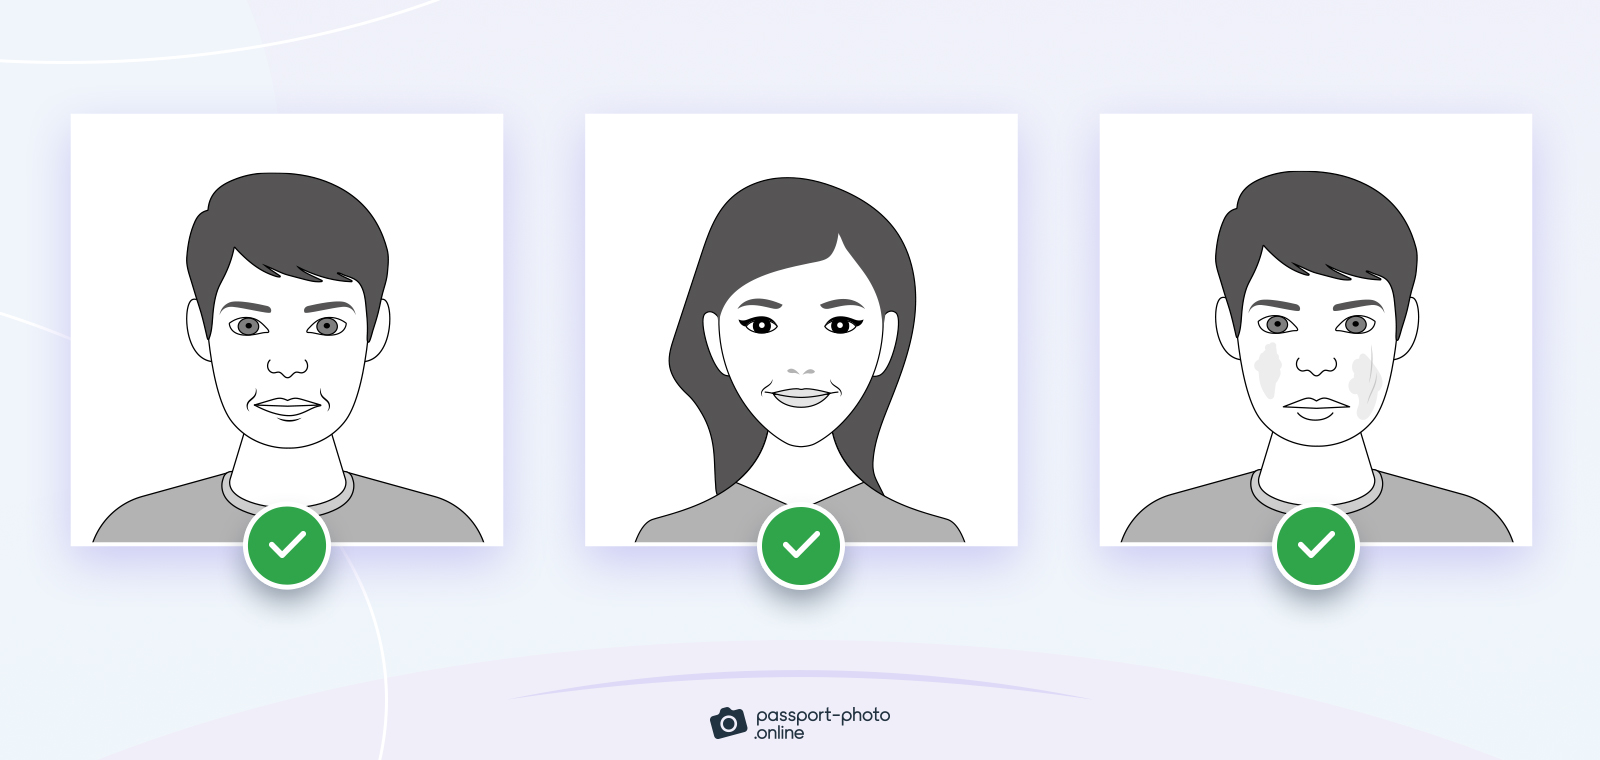 Three images showing the correct expression for passport photos.